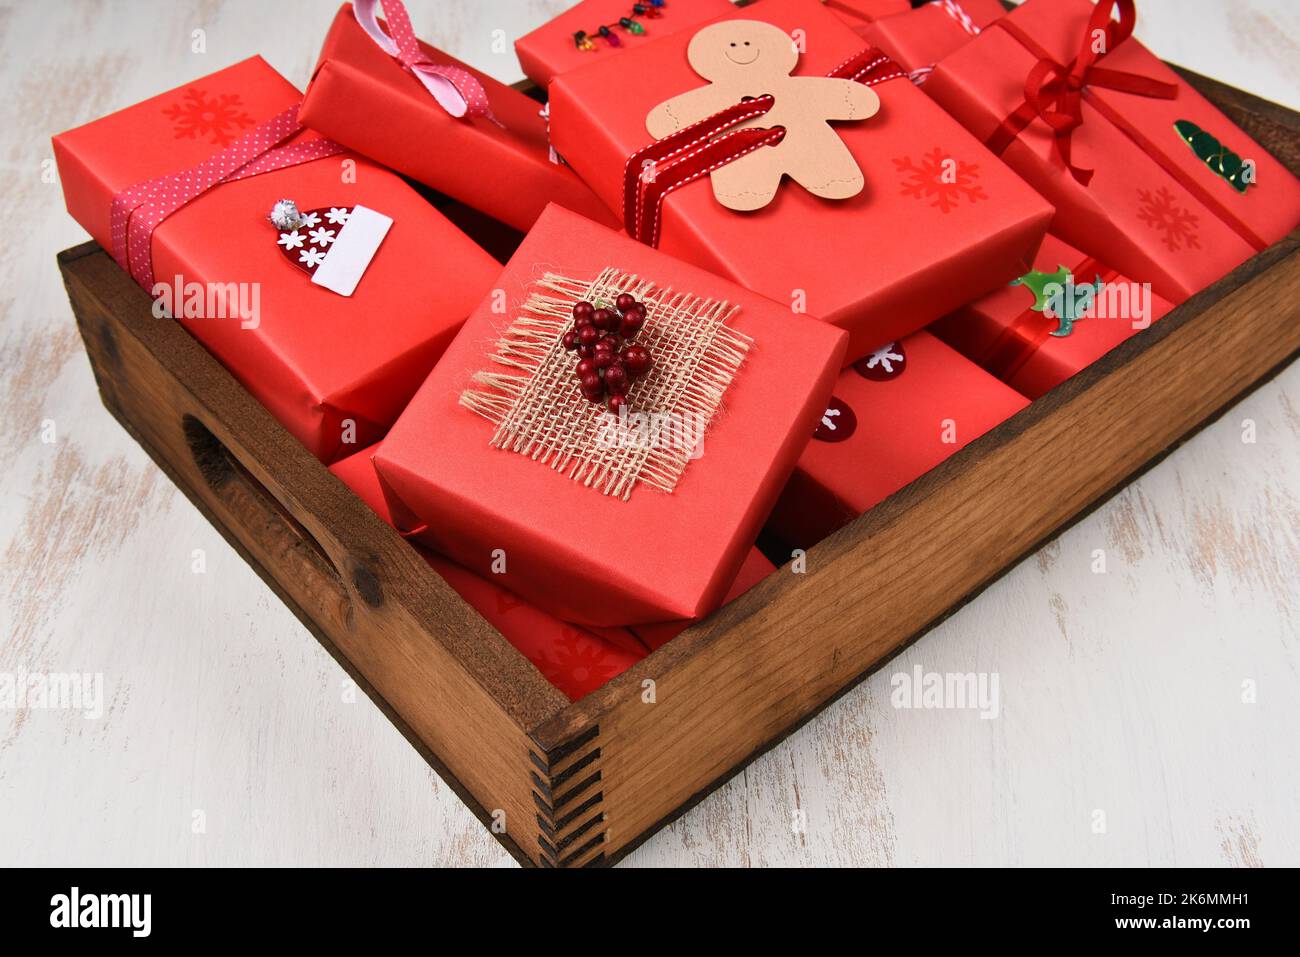 Christmas Presents. Closeup of gifts wrapped and decorated in red paper in a dark wood box. Stock Photo